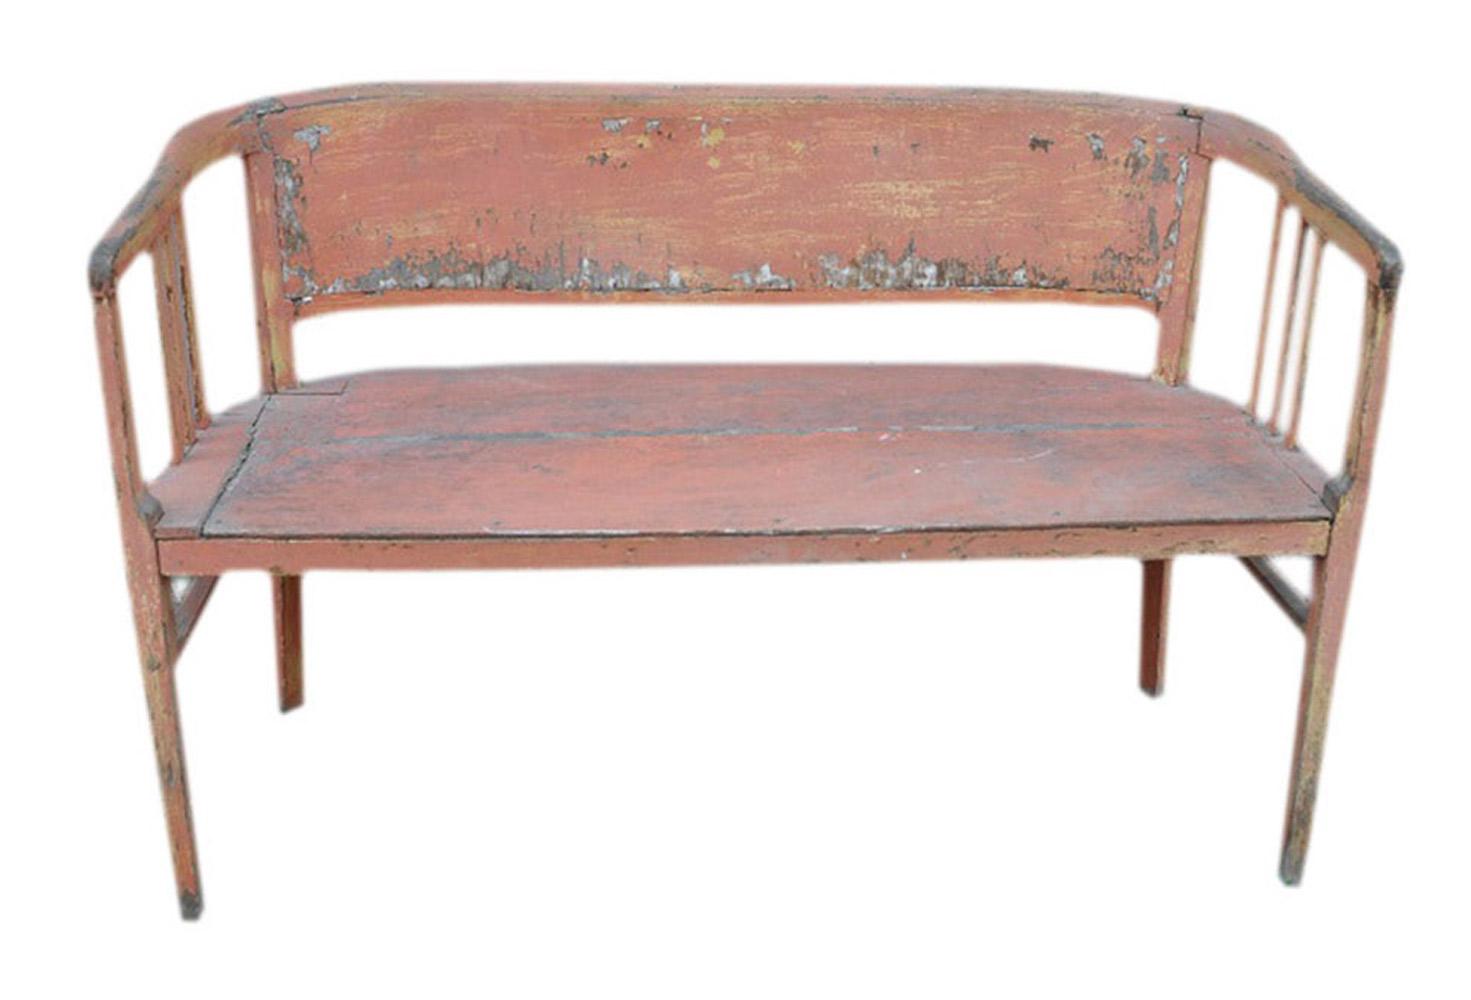 Art Nouveau bench. This wonderful bench still maintains its original paint with an amazing aged patina

The remarkable colorful paint on this bench is all original and a rare find. Found in old cafe in Hungary.